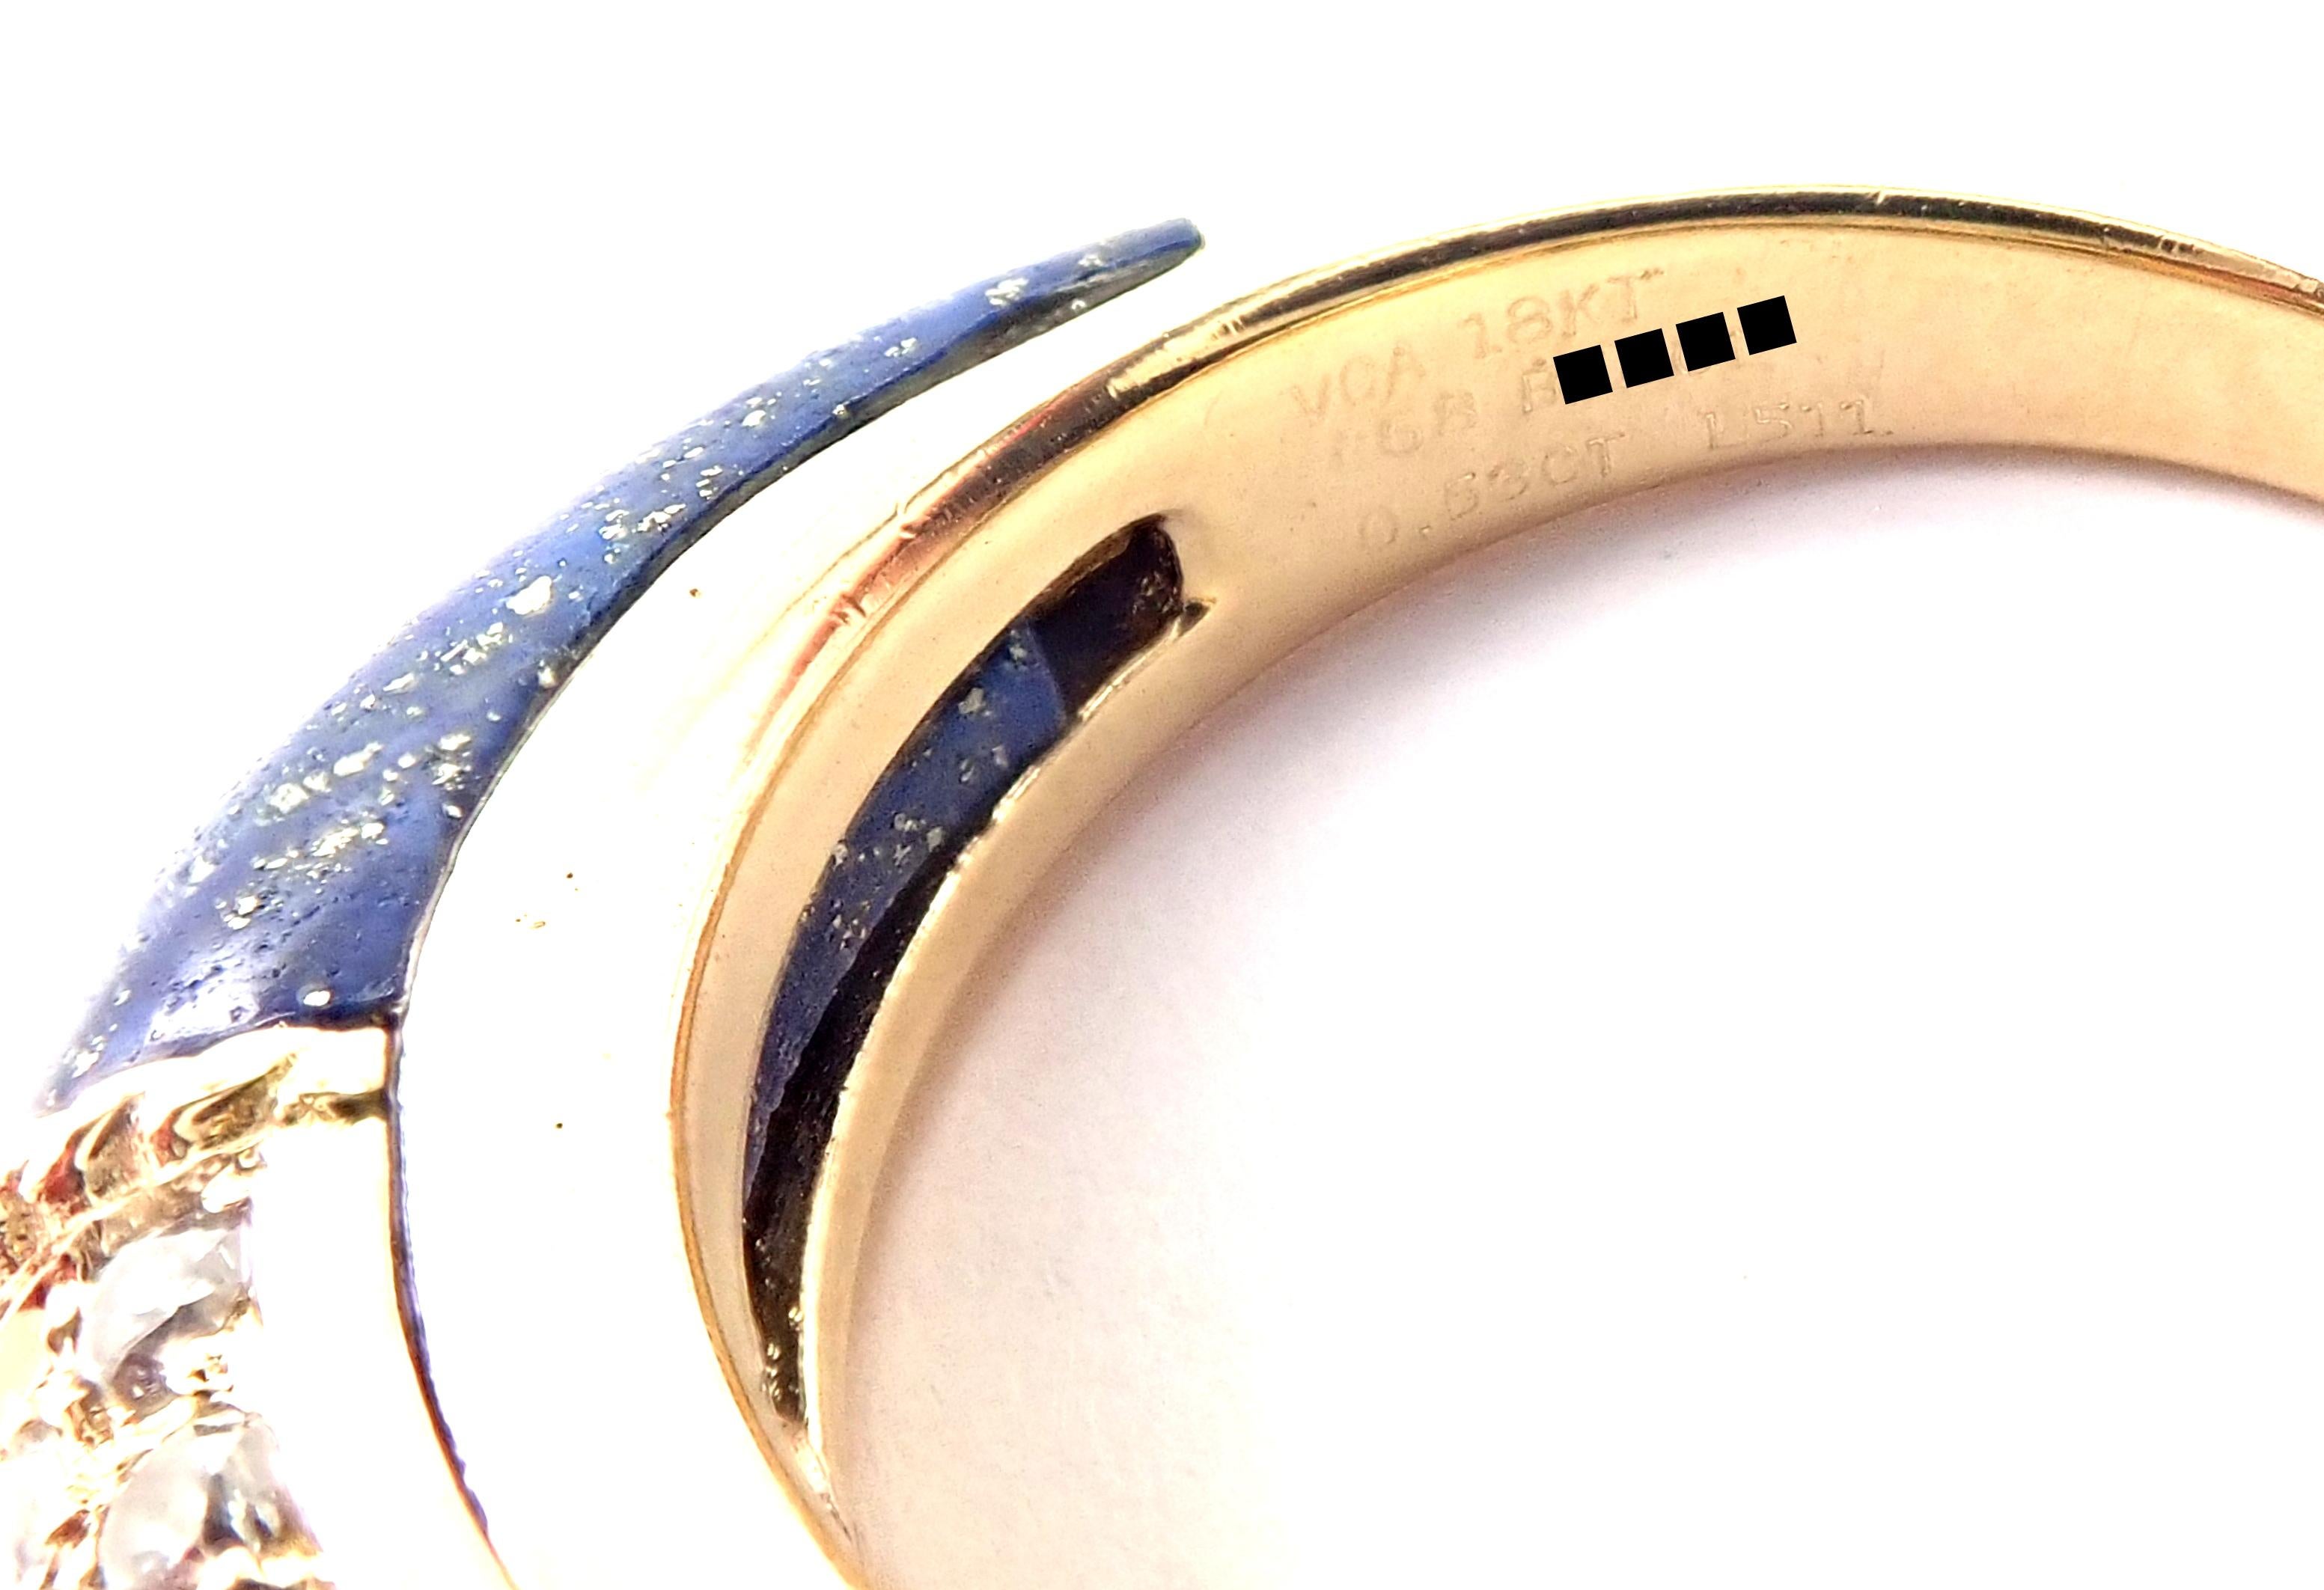 Van Cleef & Arpels Diamond Lapis Lazuli Philippine Yellow Gold Band Ring In Excellent Condition For Sale In Holland, PA